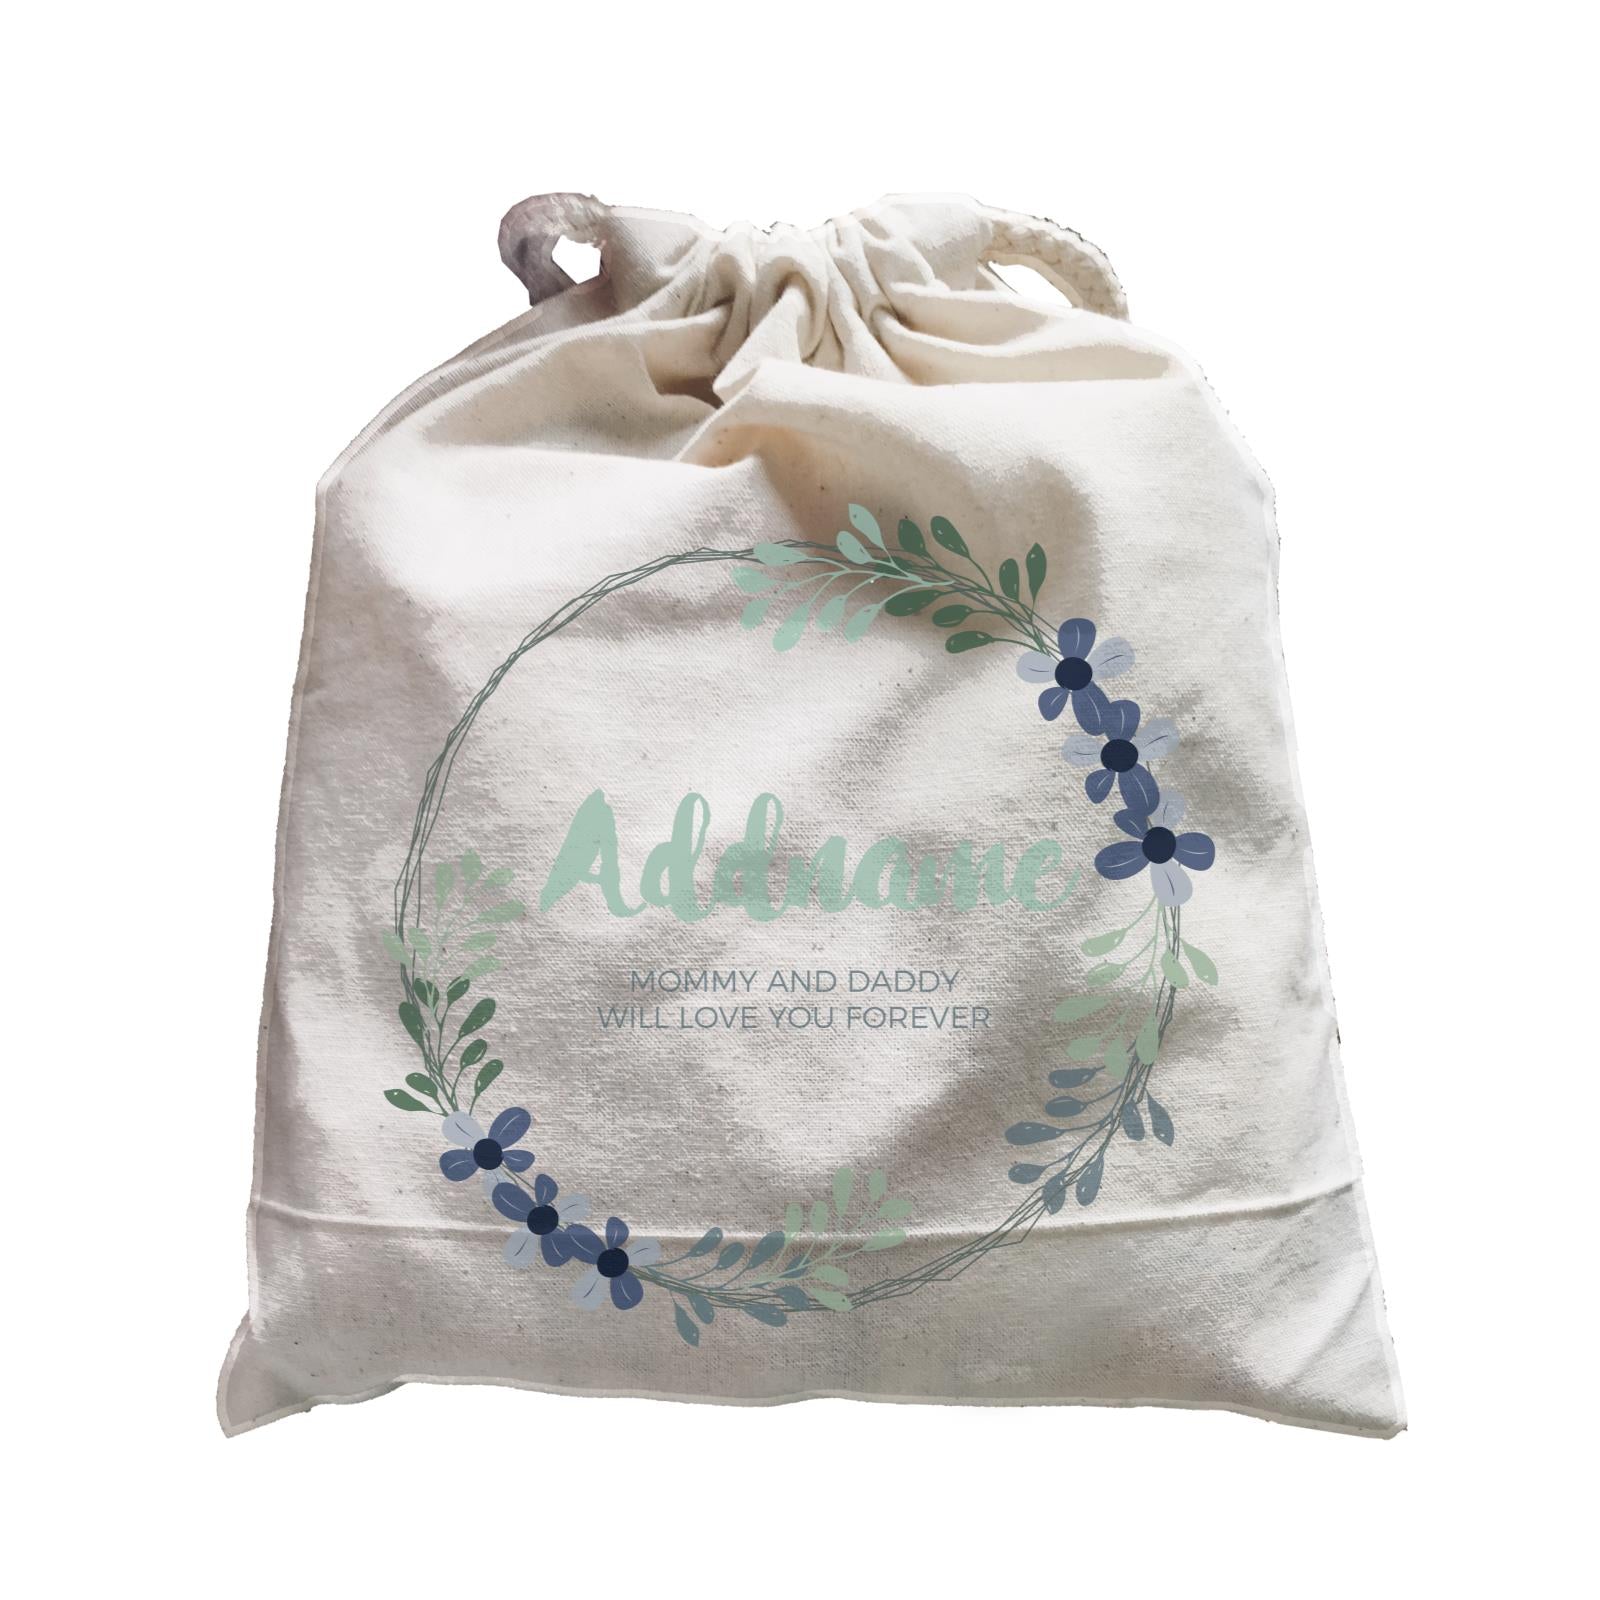 Dark Green and Navy Blue Wreath Personalizable with Name and Text Satchel